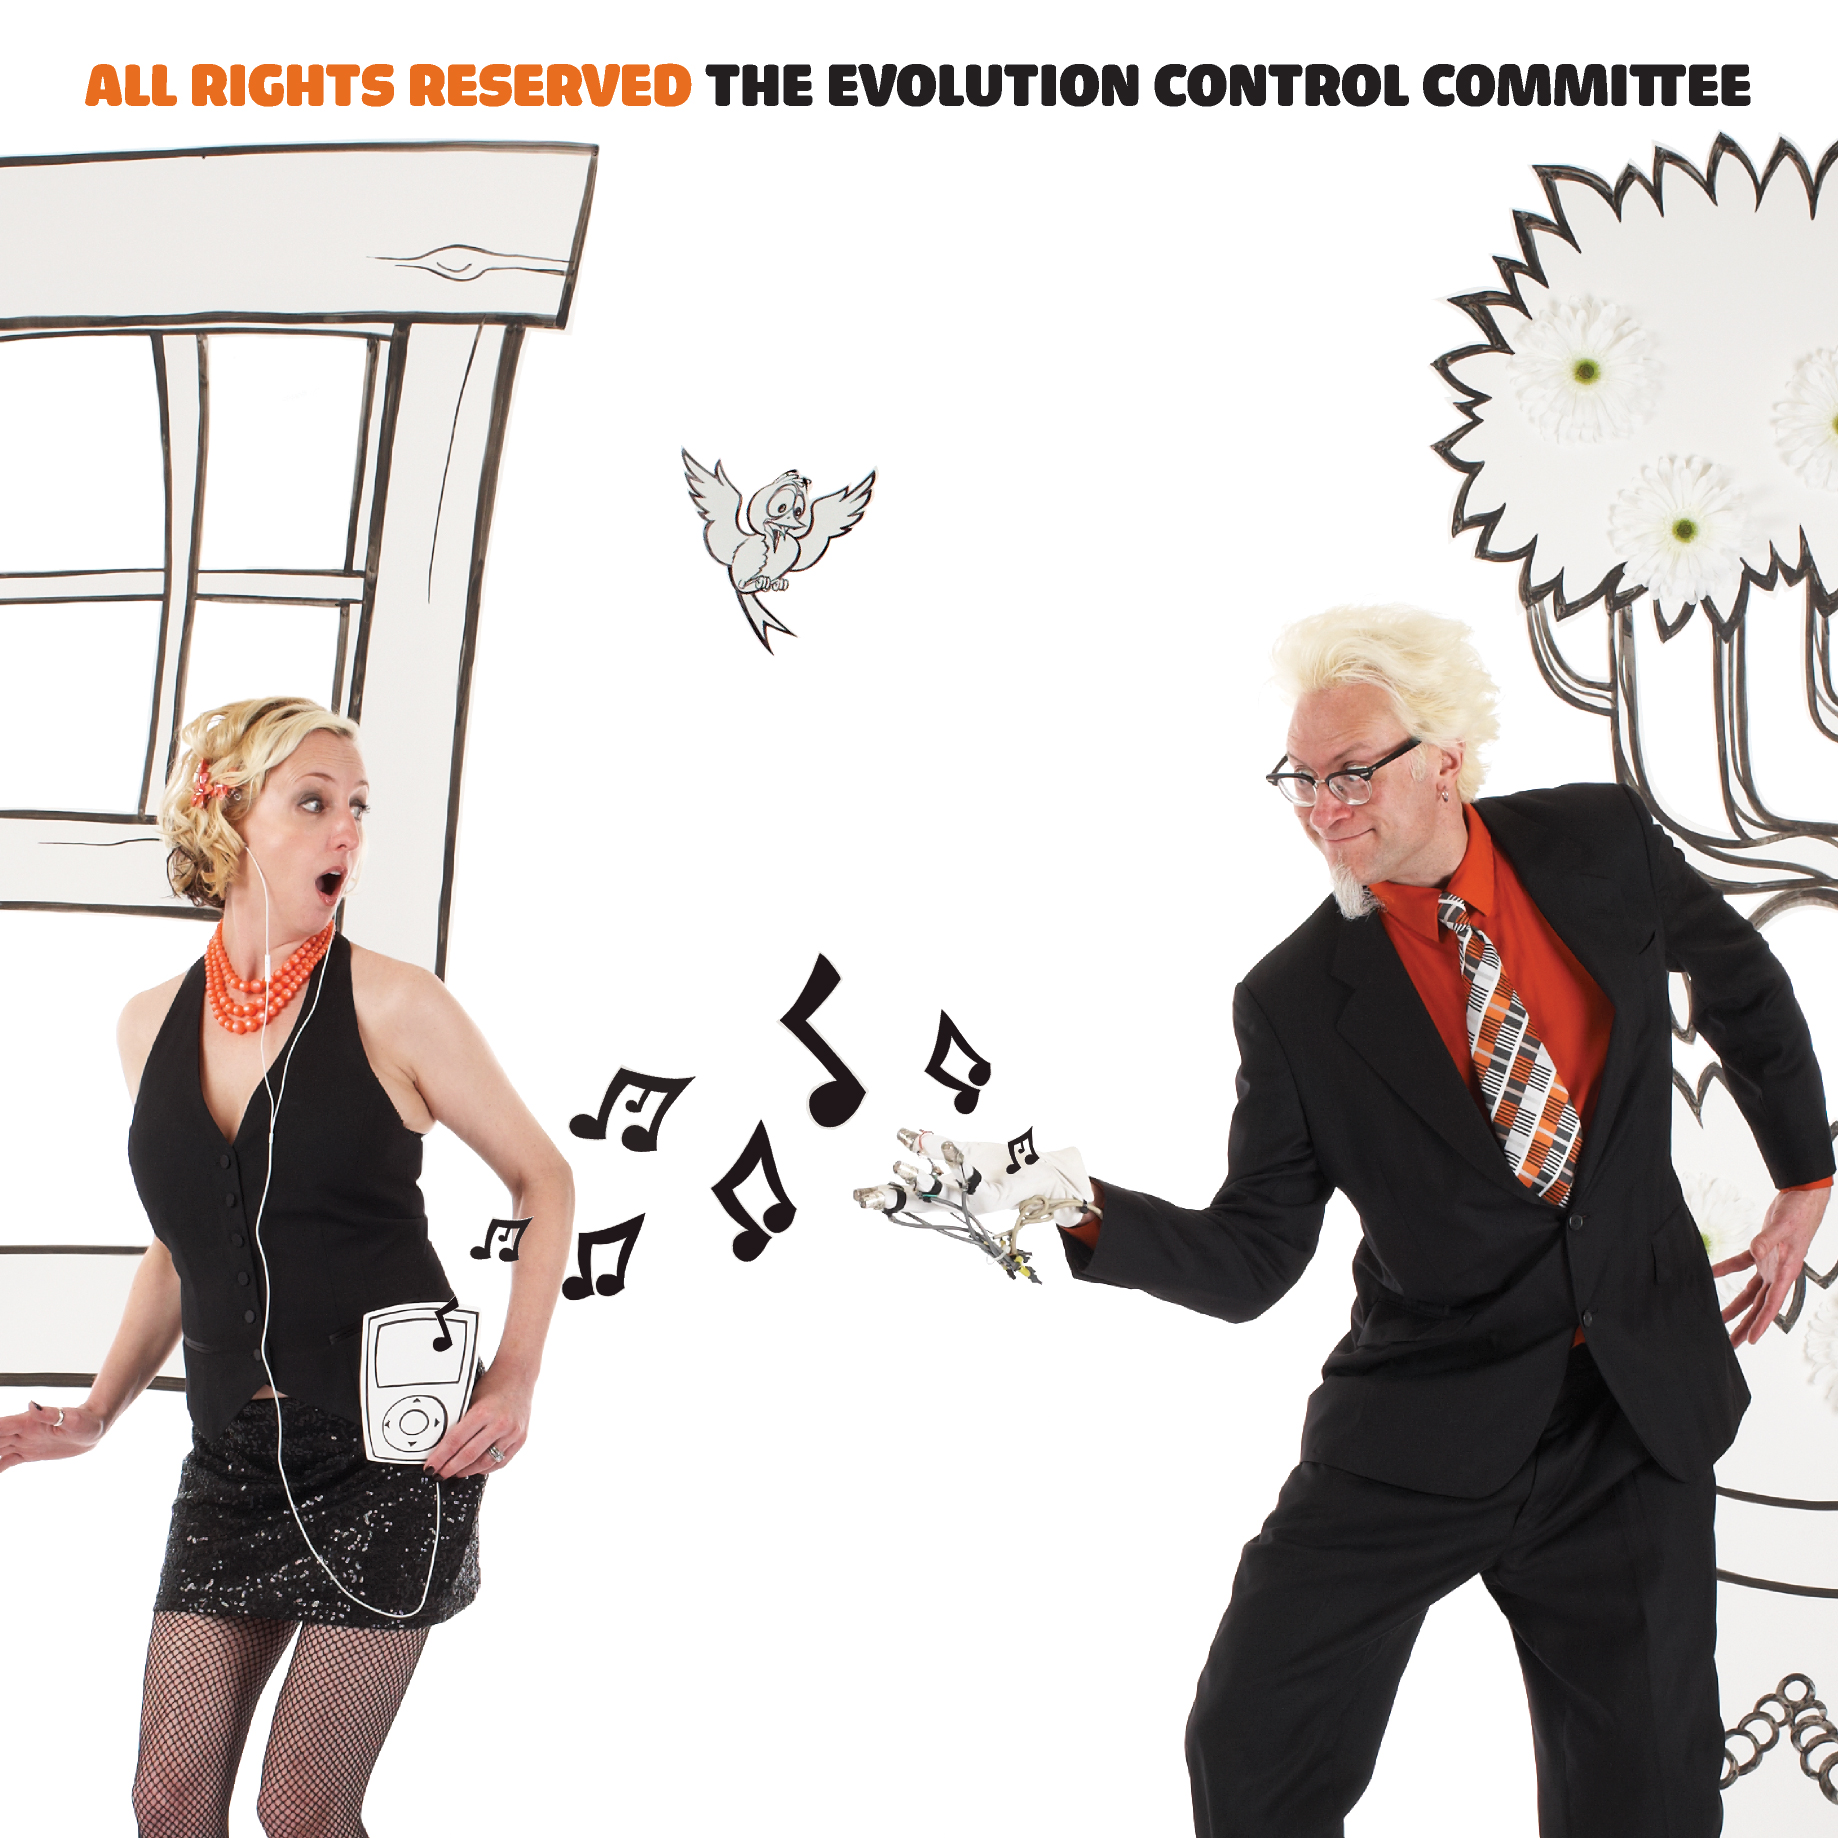 The Evolution Control Committee